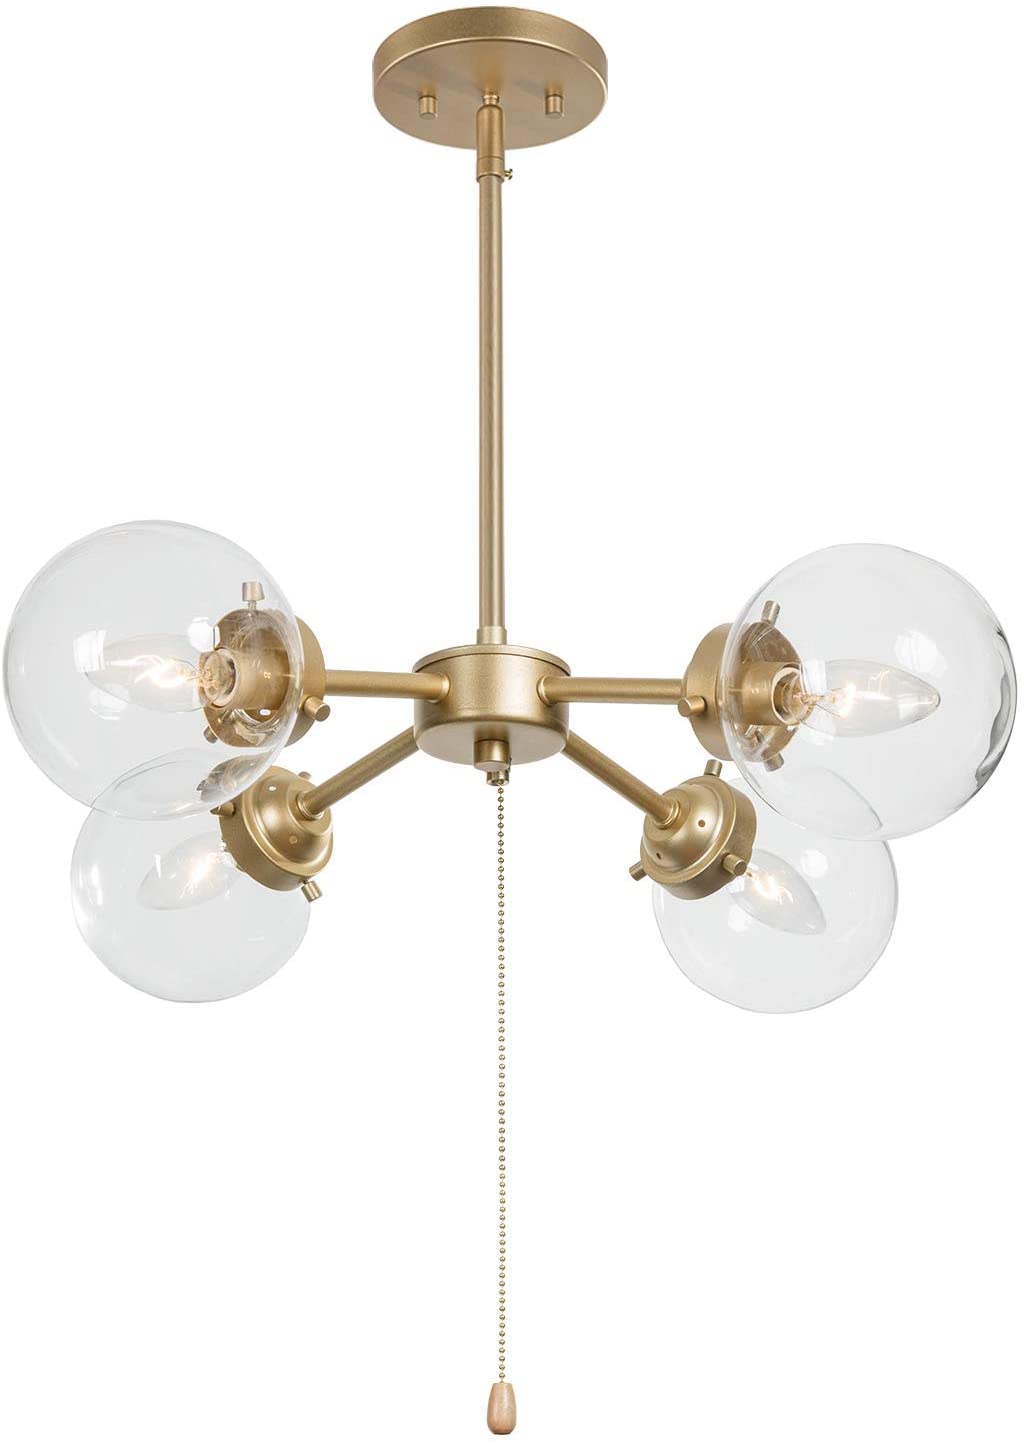 Pull Chain Light Fixture In 2020 Review, Pull Chain Light Fixture